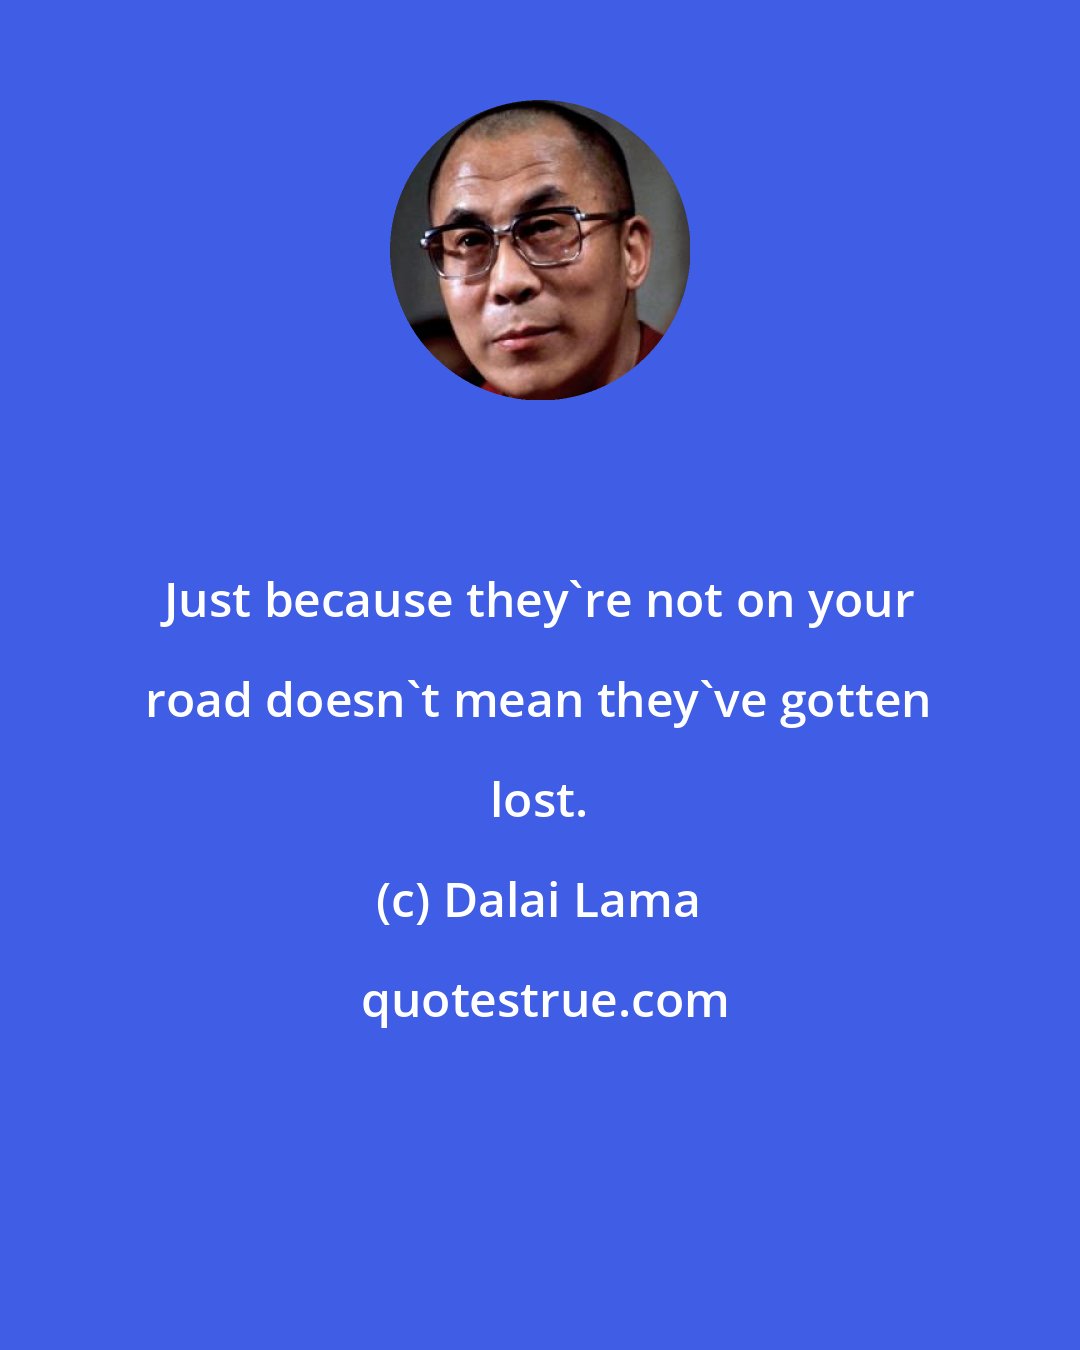 Dalai Lama: Just because they're not on your road doesn't mean they've gotten lost.